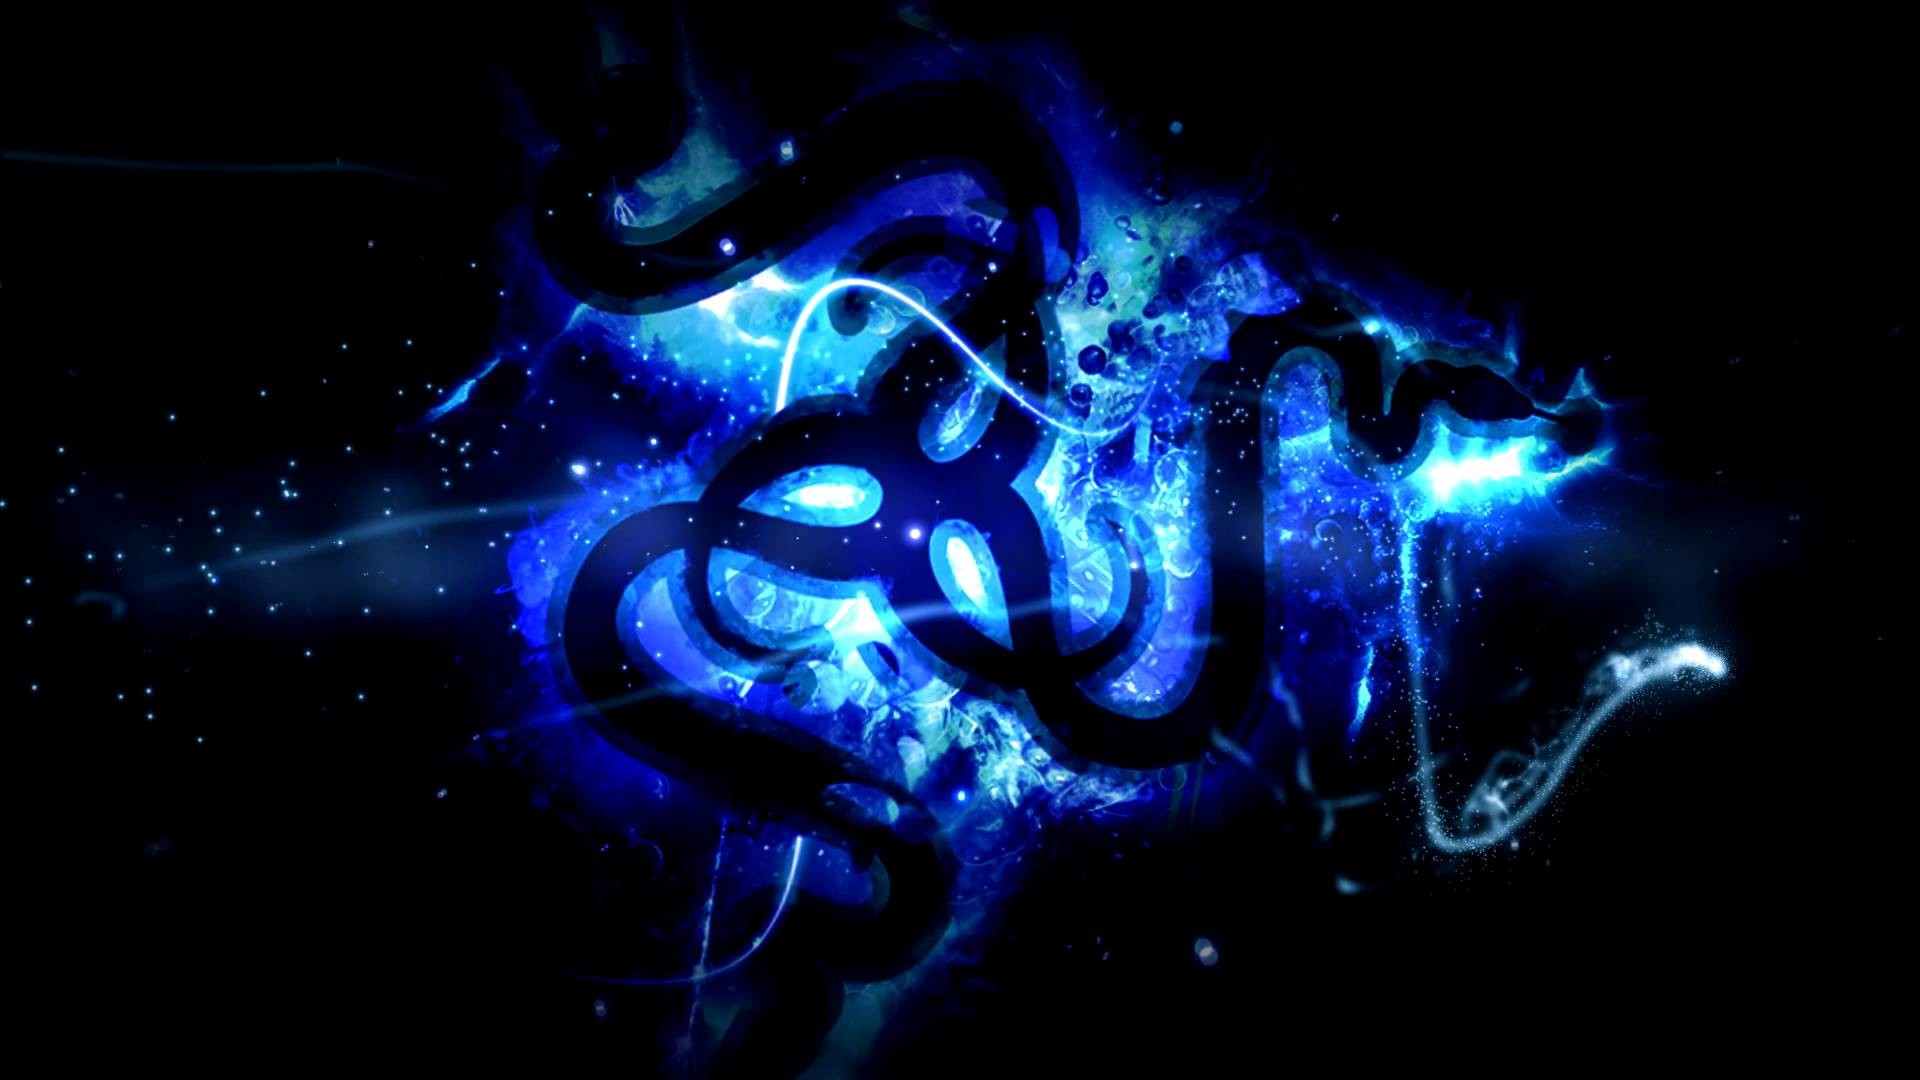 1920x1080 Unique 5 Cool Midnight Blue Wallpaper Razer With Resolution 1920 x 1920 |  Best Cool Wallpapers